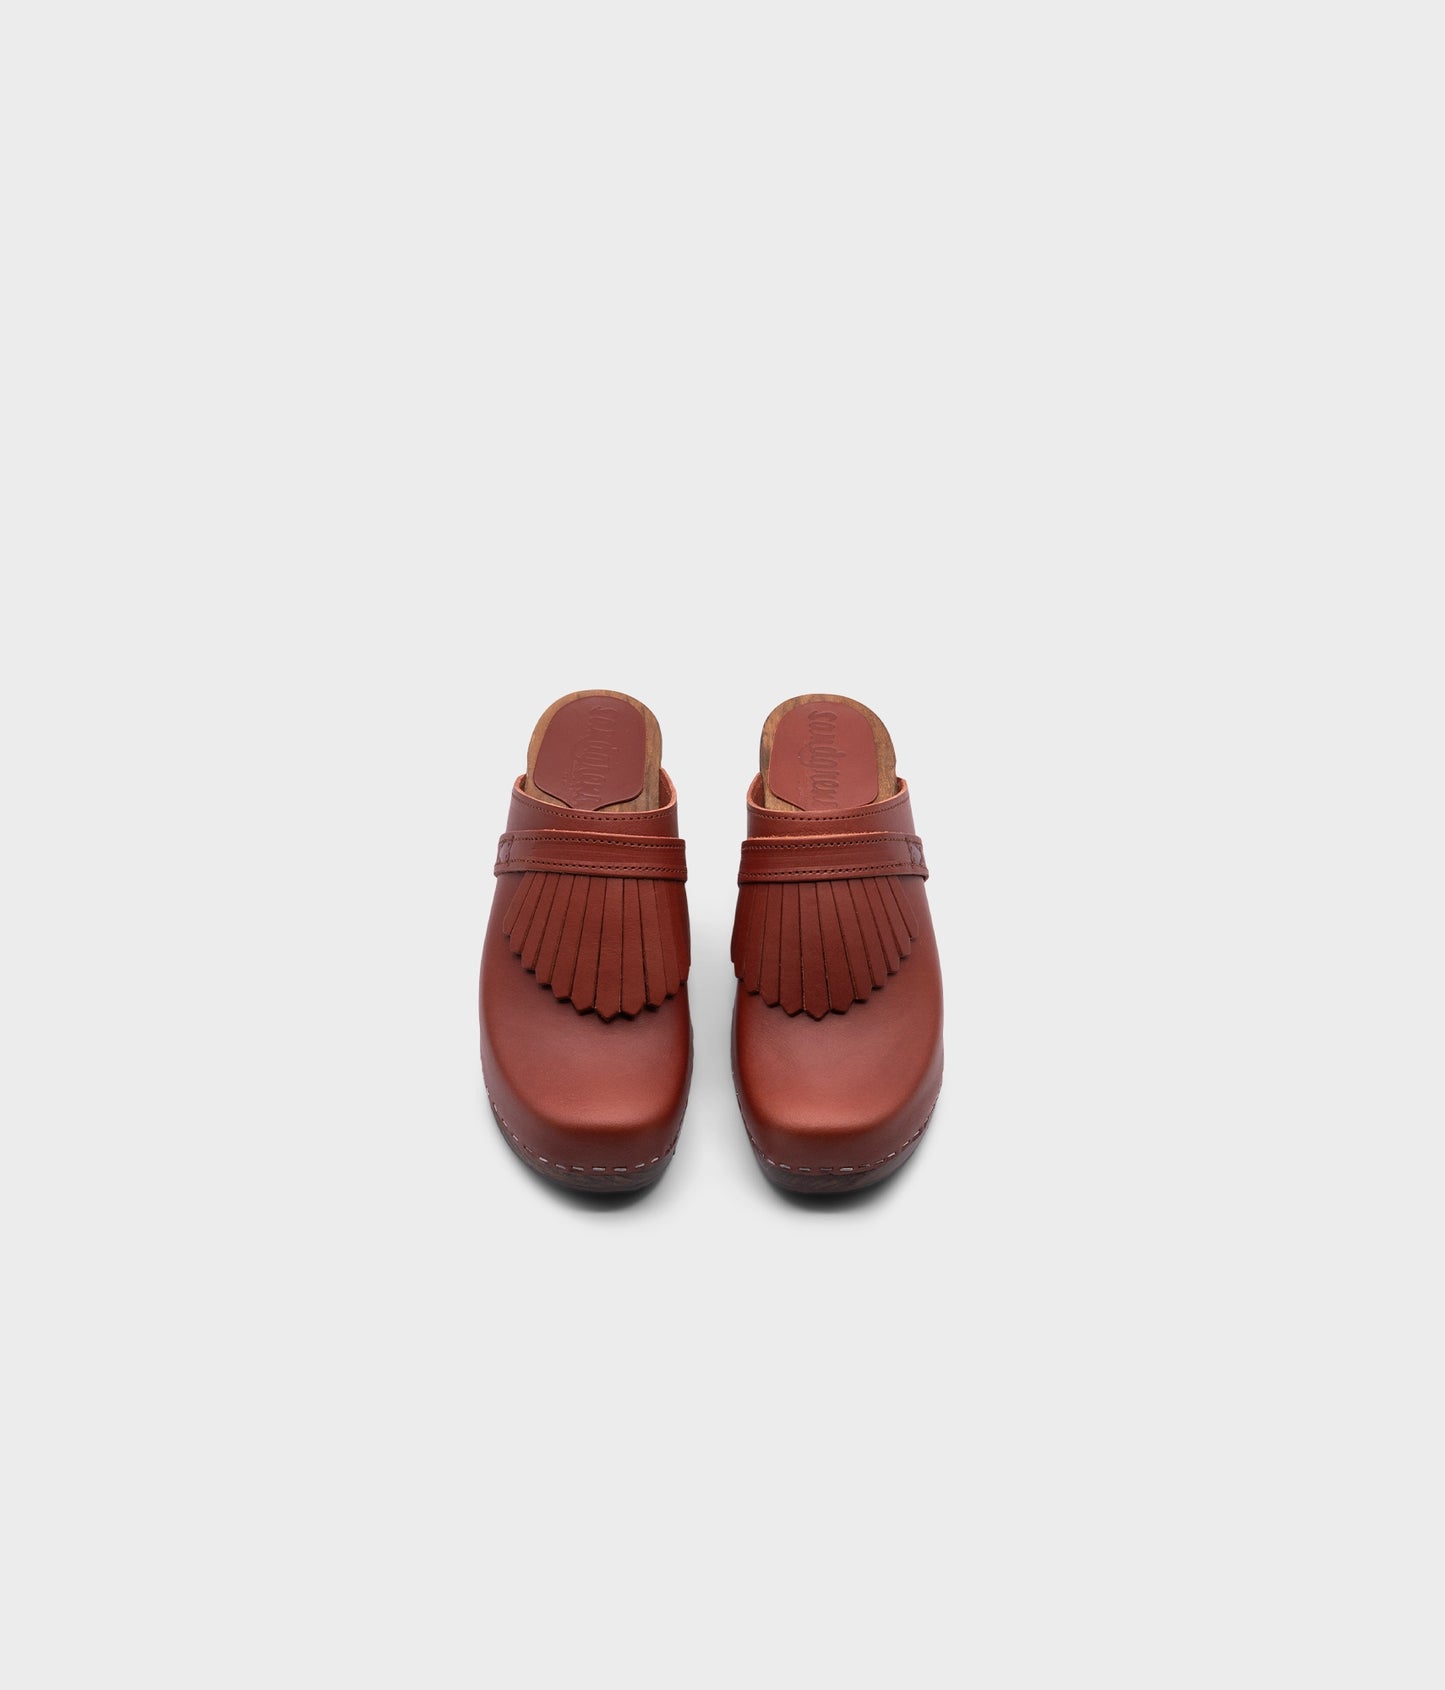 high rise clog mule in cognac red vegetable tanned leather stapled on a light wooden base with a leather strap with fringes